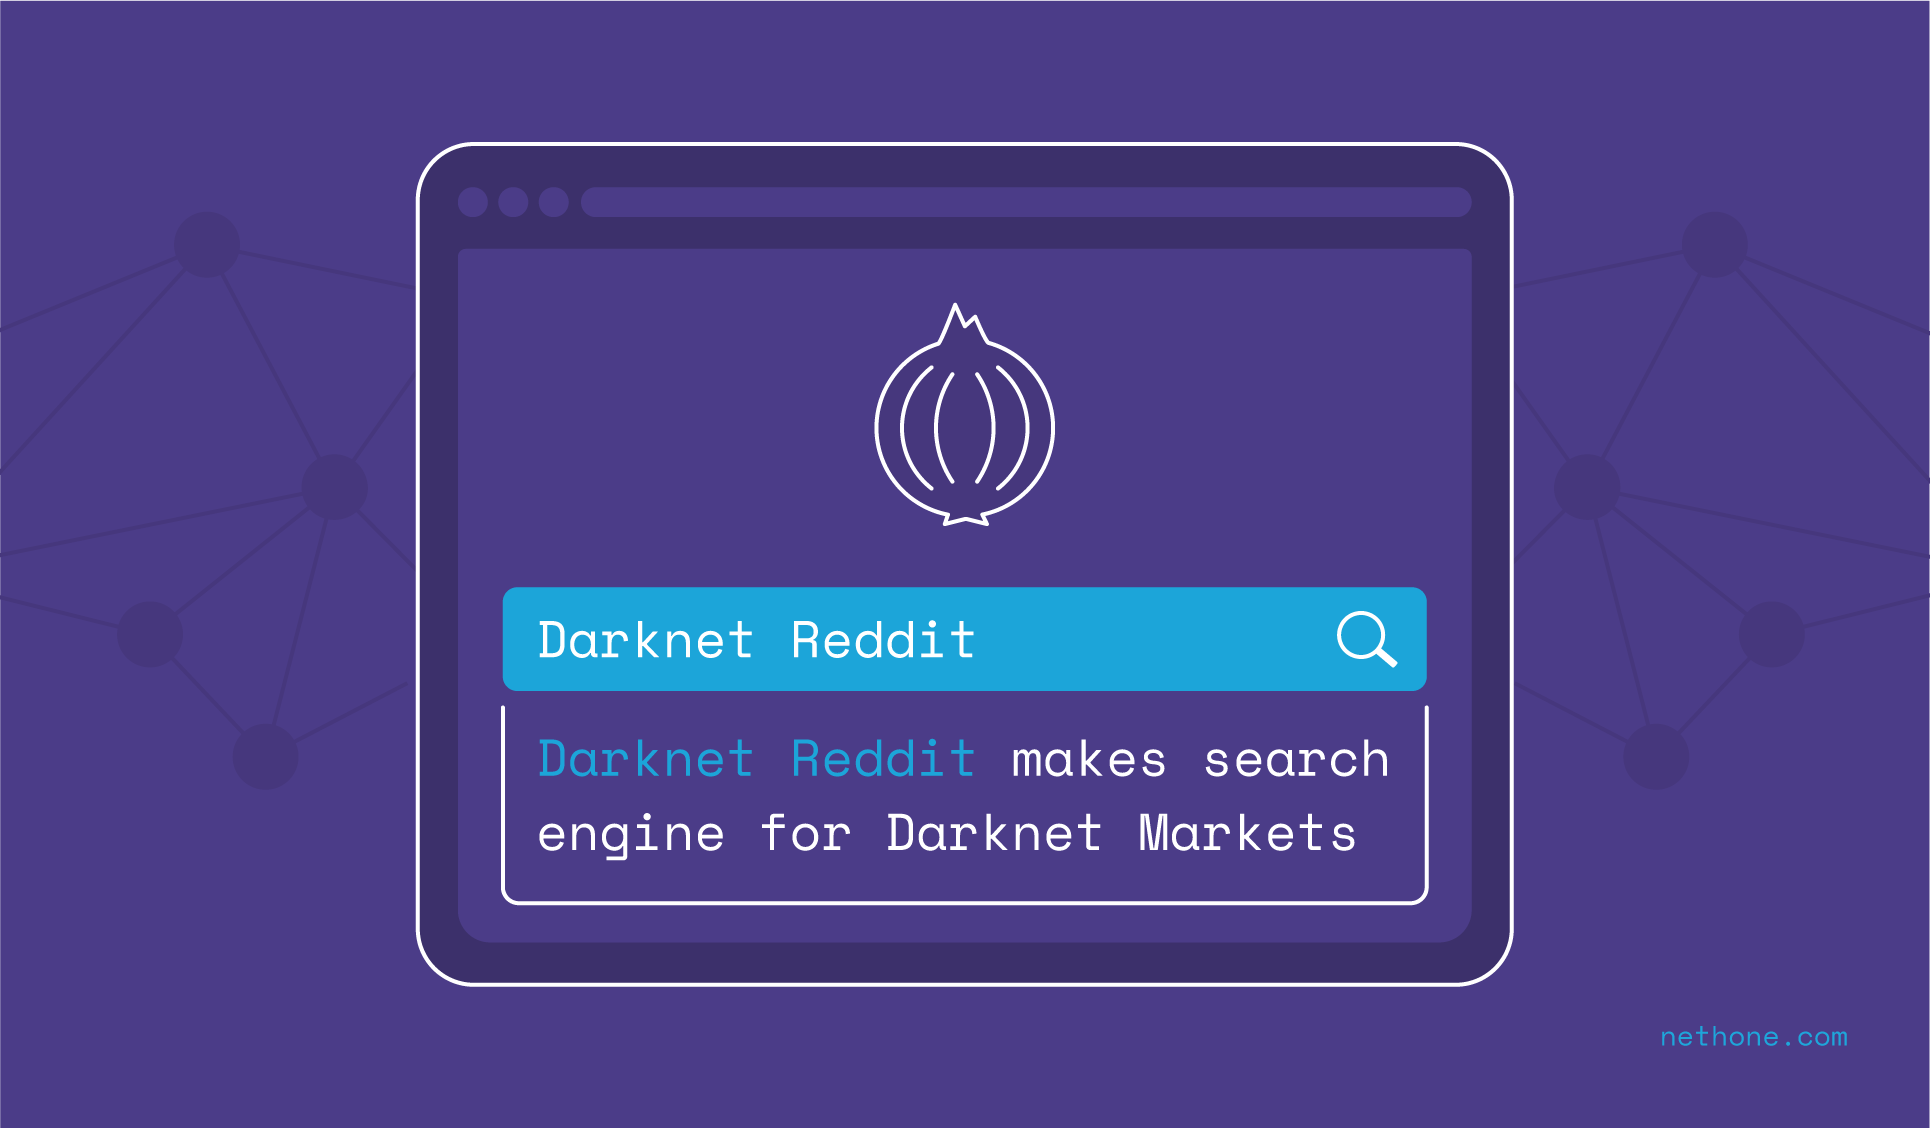 How to buy from the darknet markets